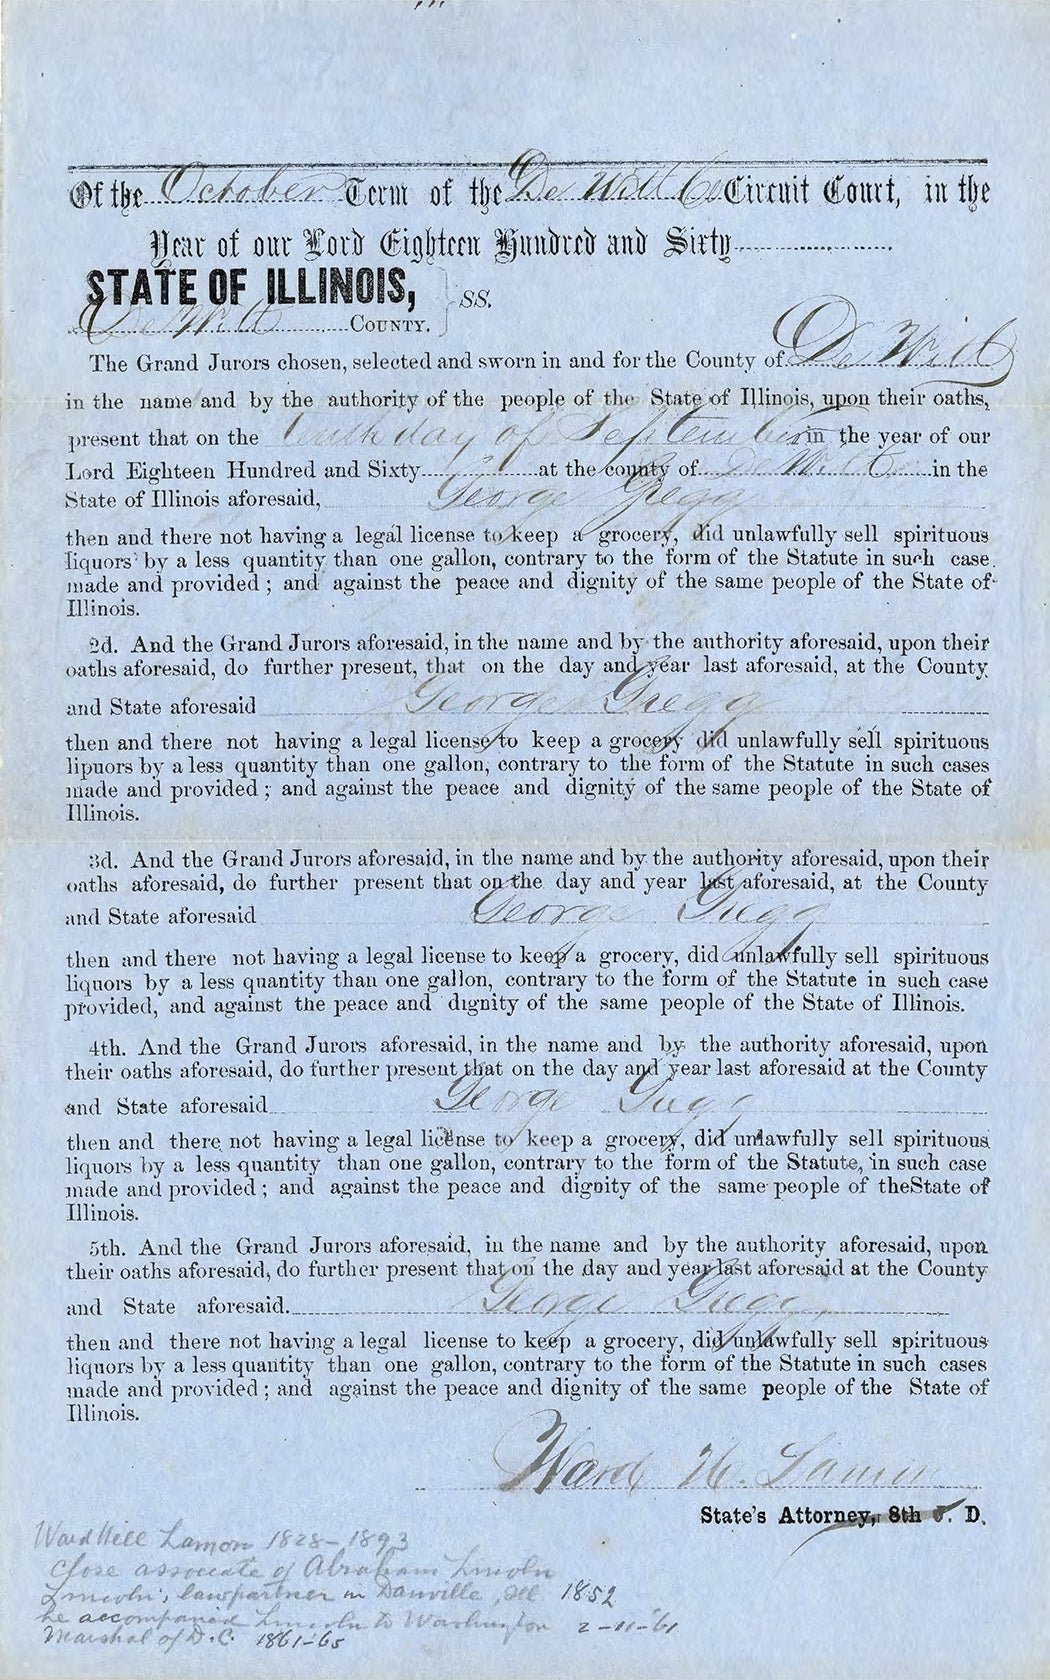 Illinois Grand Jury indictment of George Gregg for selling spirituous liquors without a license. Signed by Ward H. Lamon, former law partner of Abraham Lincoln.